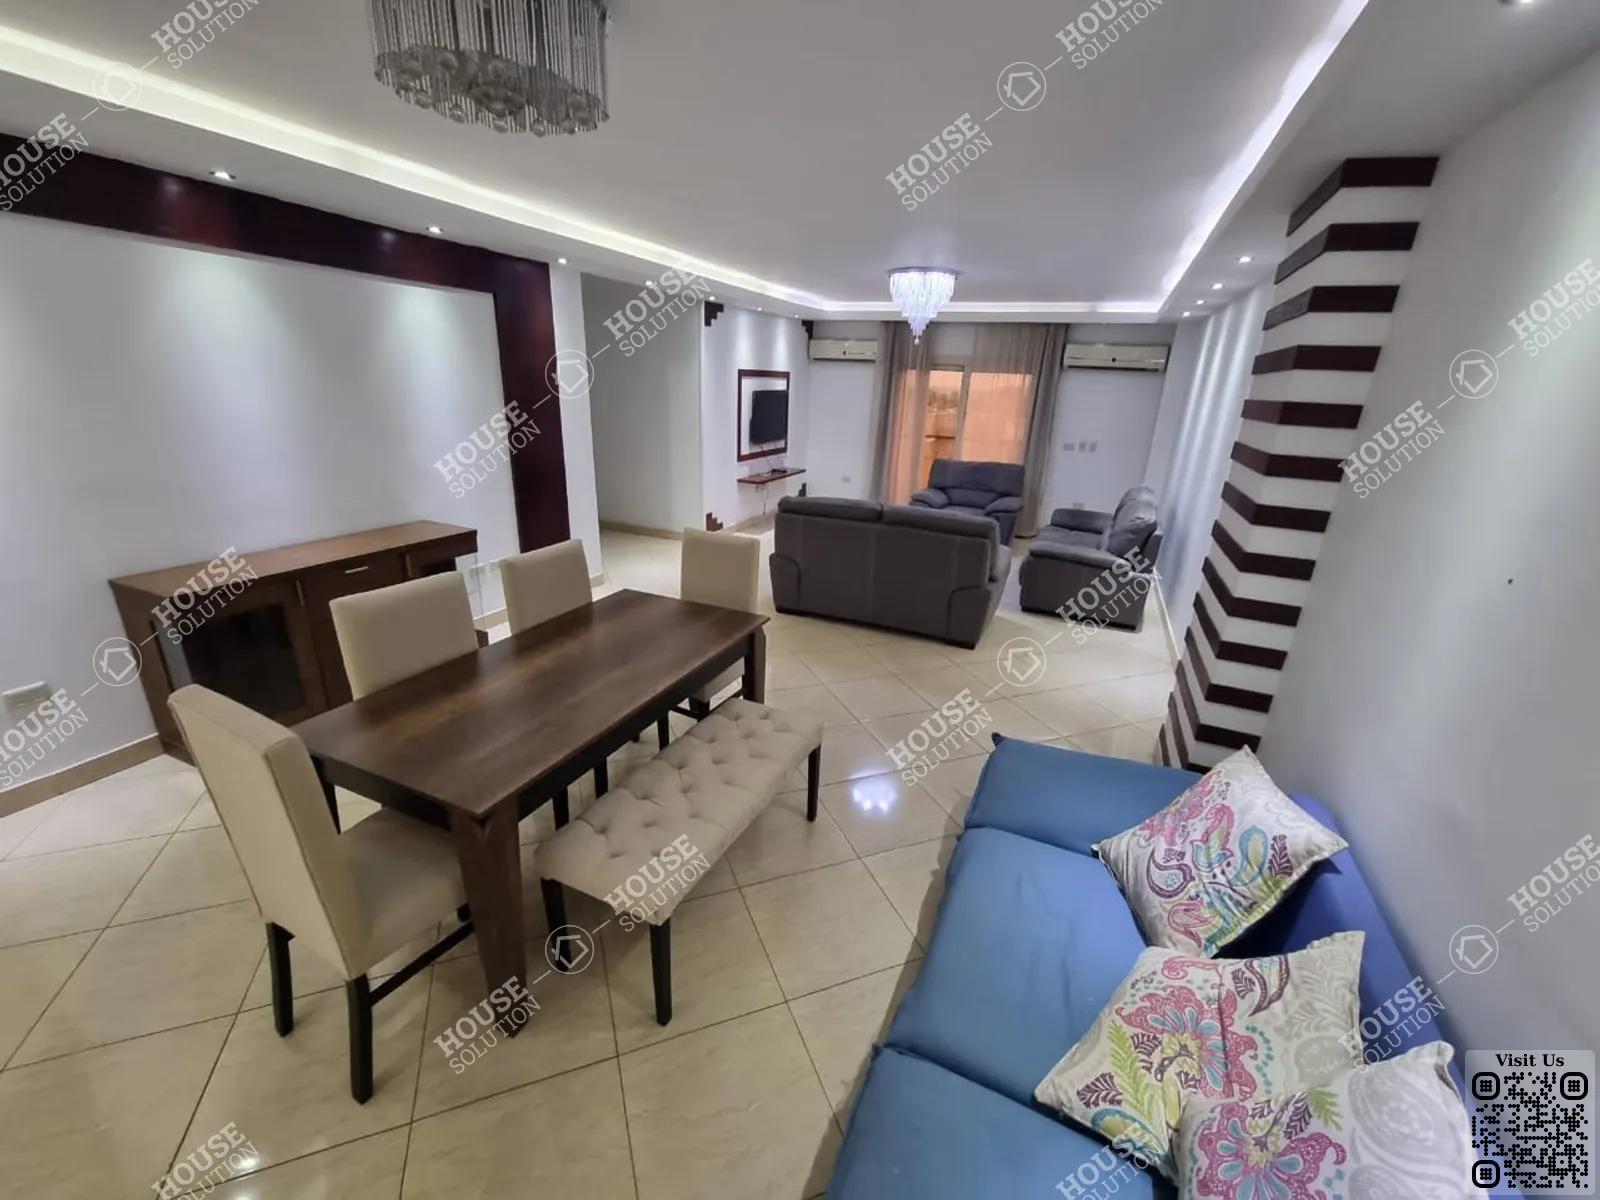 DINING AREA @ Apartments For Rent In Maadi Maadi Sarayat Area: 200 m² consists of 3 Bedrooms 2 Bathrooms Modern furnished 4 stars #5200-2